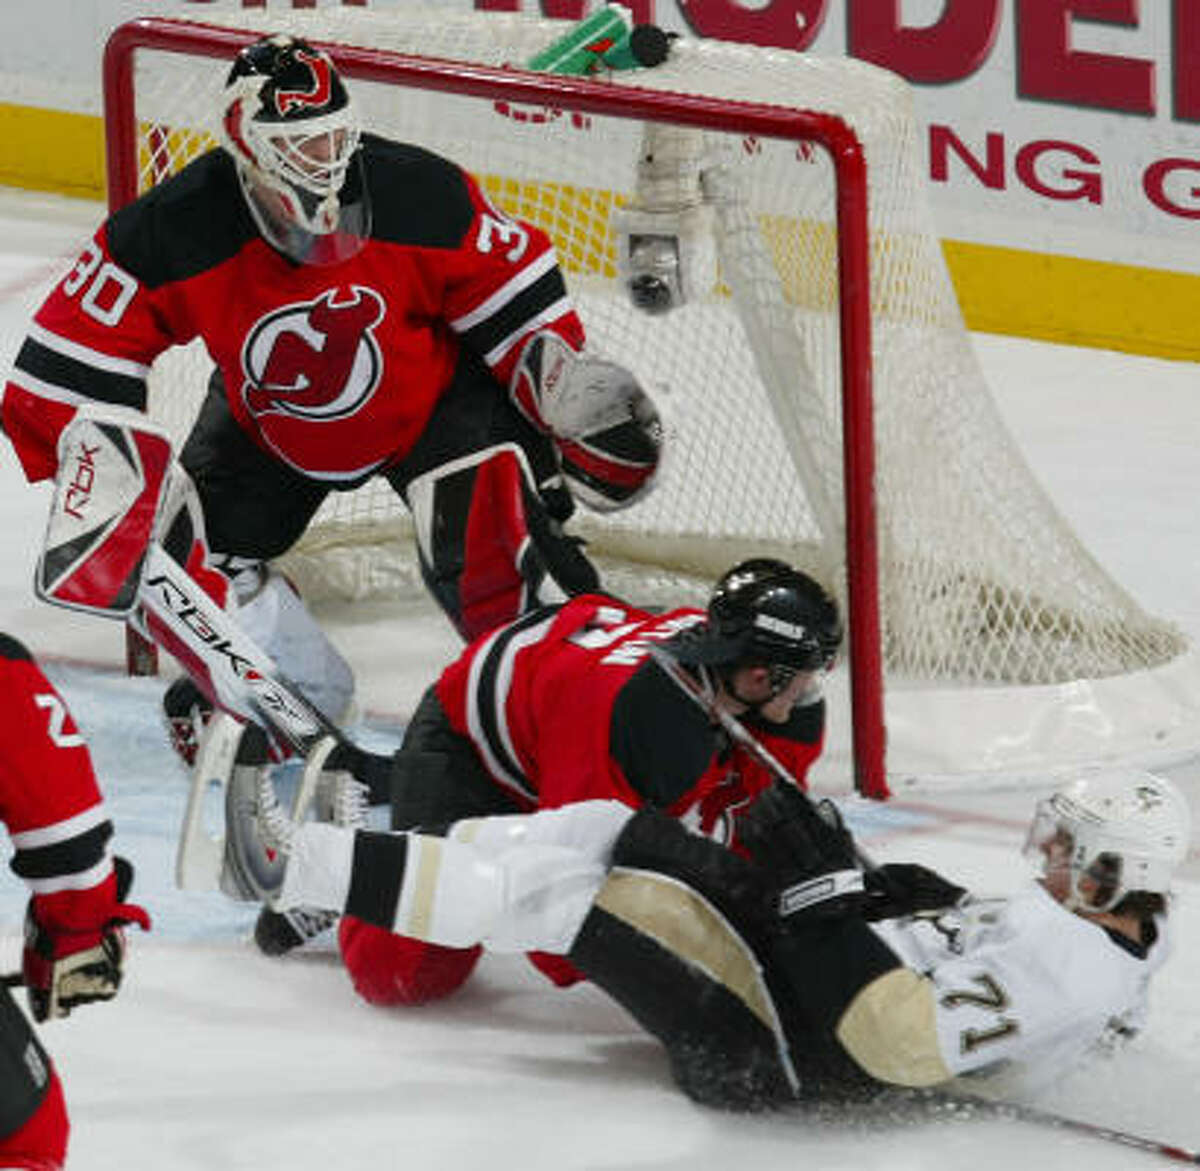 The Penguins' Evgeni Malkin is taken down by the Devils' Paul Martin in front of the net.